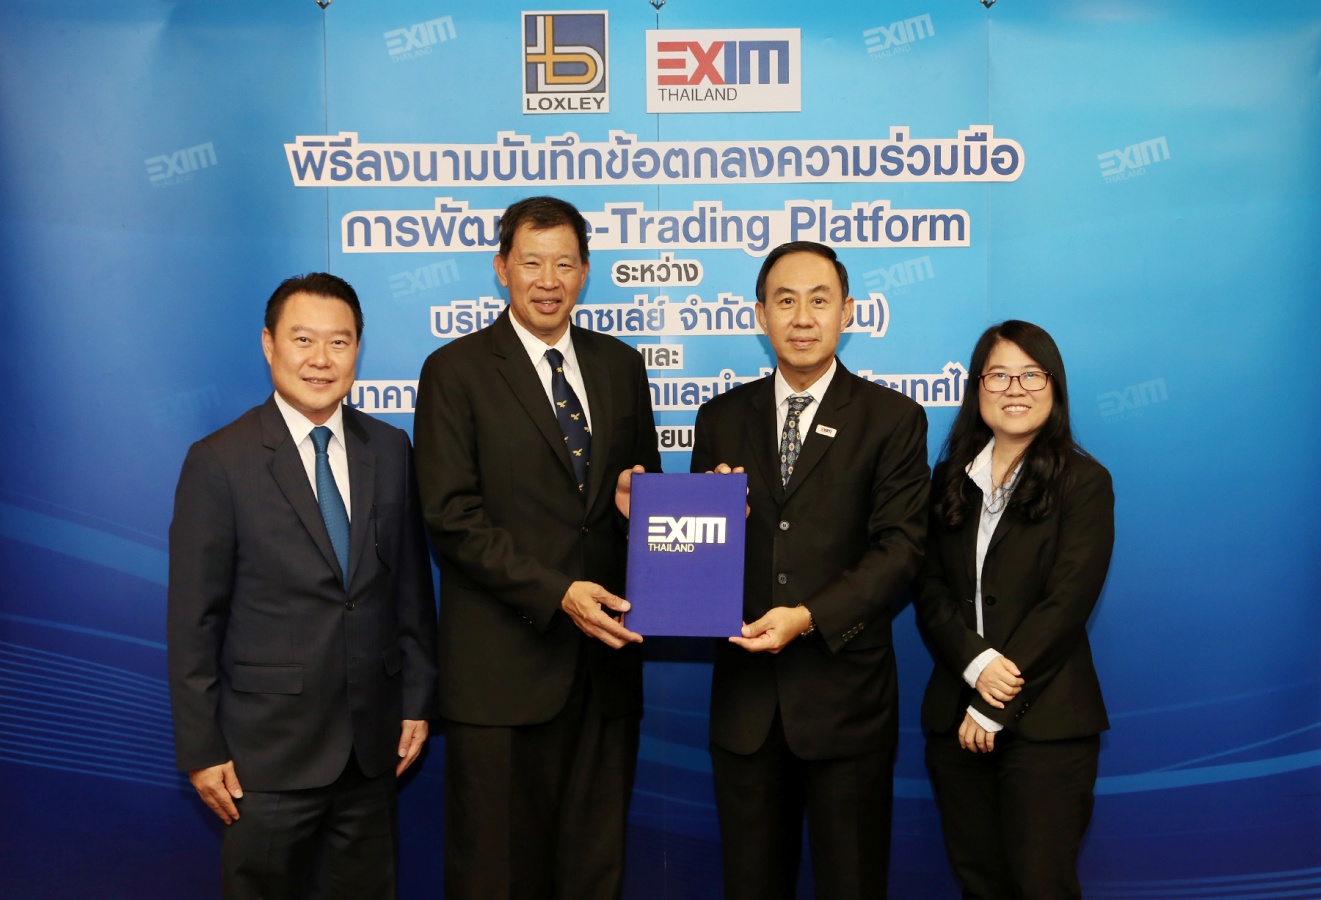 EXIM Thailand and Loxley PCL Co-develop e-Trading Platform